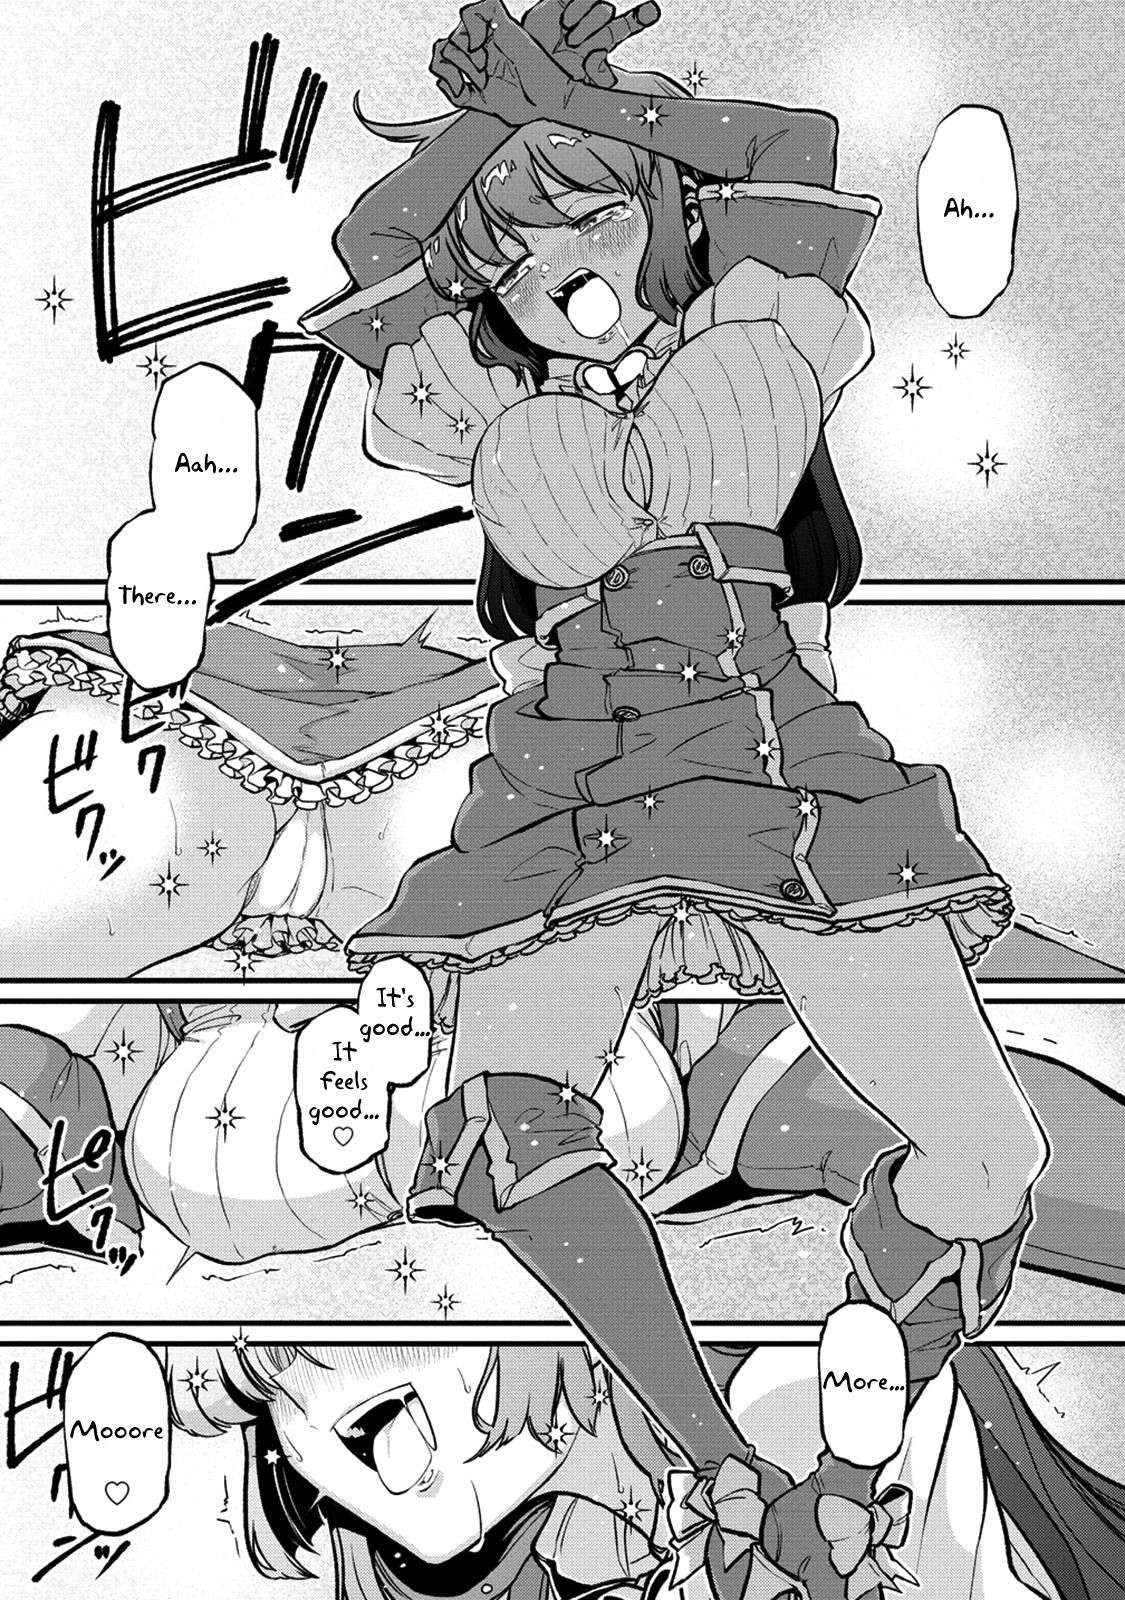 Gushing over Magical Girls - chapter 44 - #2